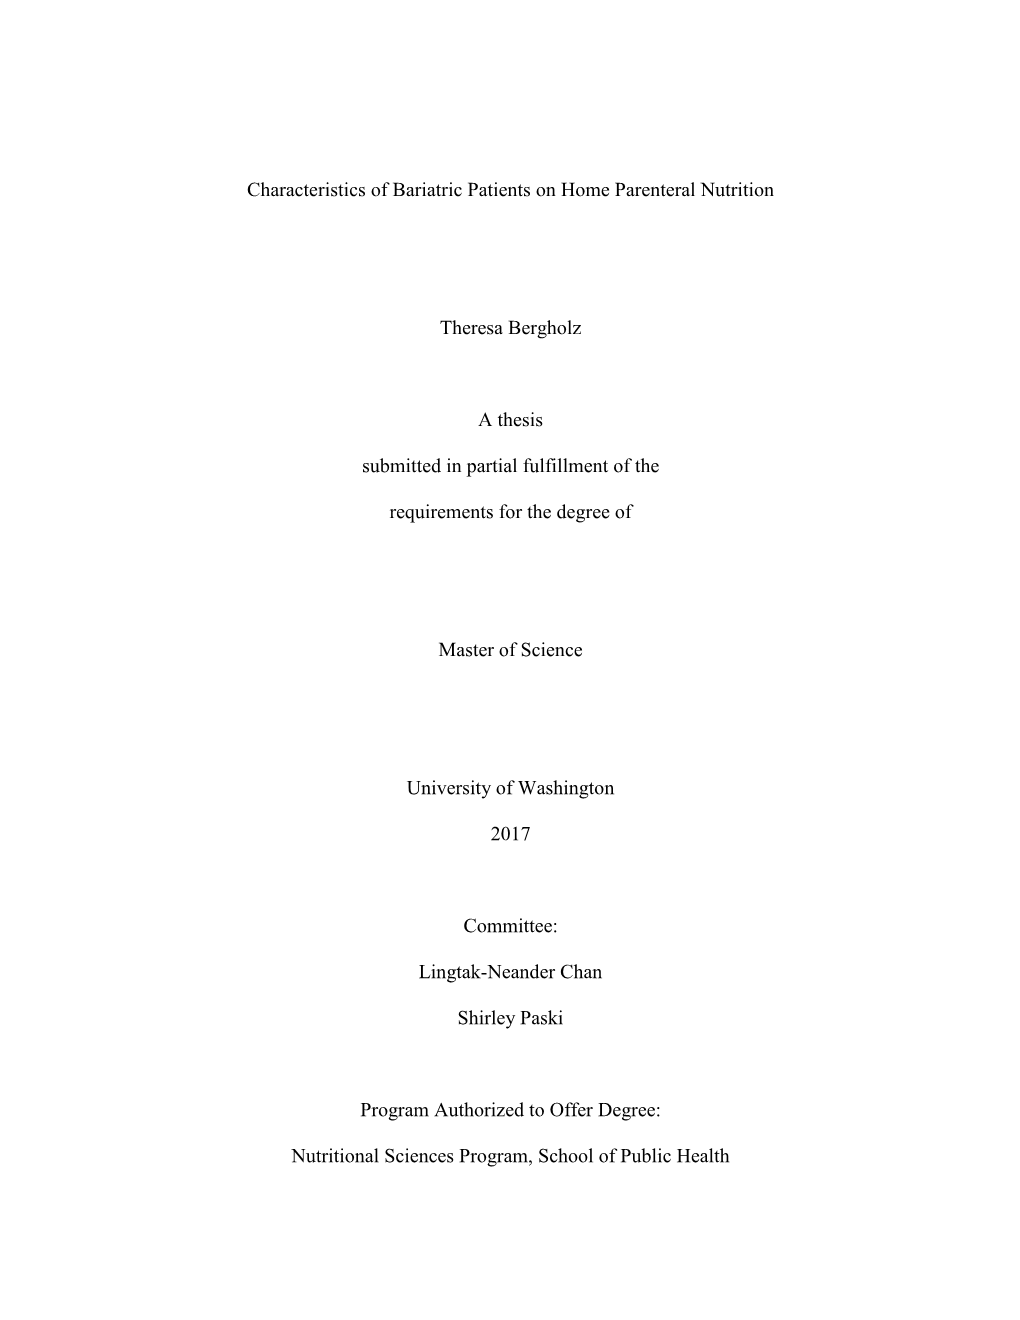 Characteristics of Bariatric Patients on Home Parenteral Nutrition Theresa Bergholz a Thesis Submitted in Partial Fulfillment Of